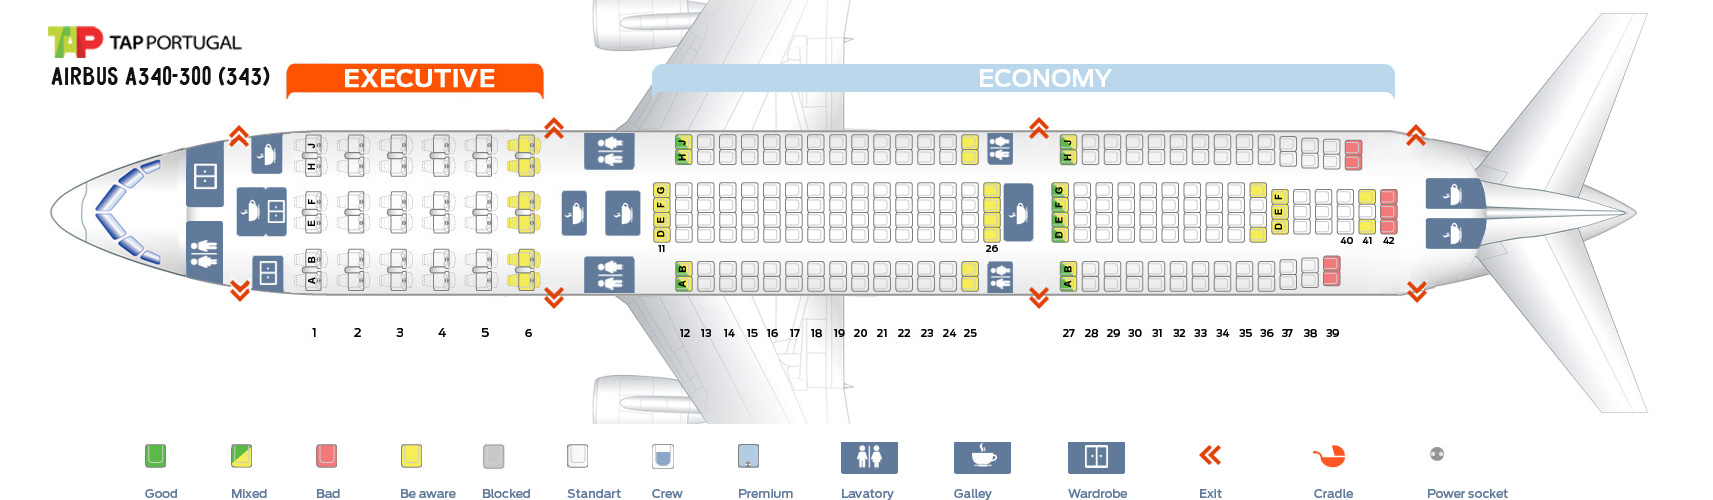 Airbus Industrie A340 300 Seating Chart